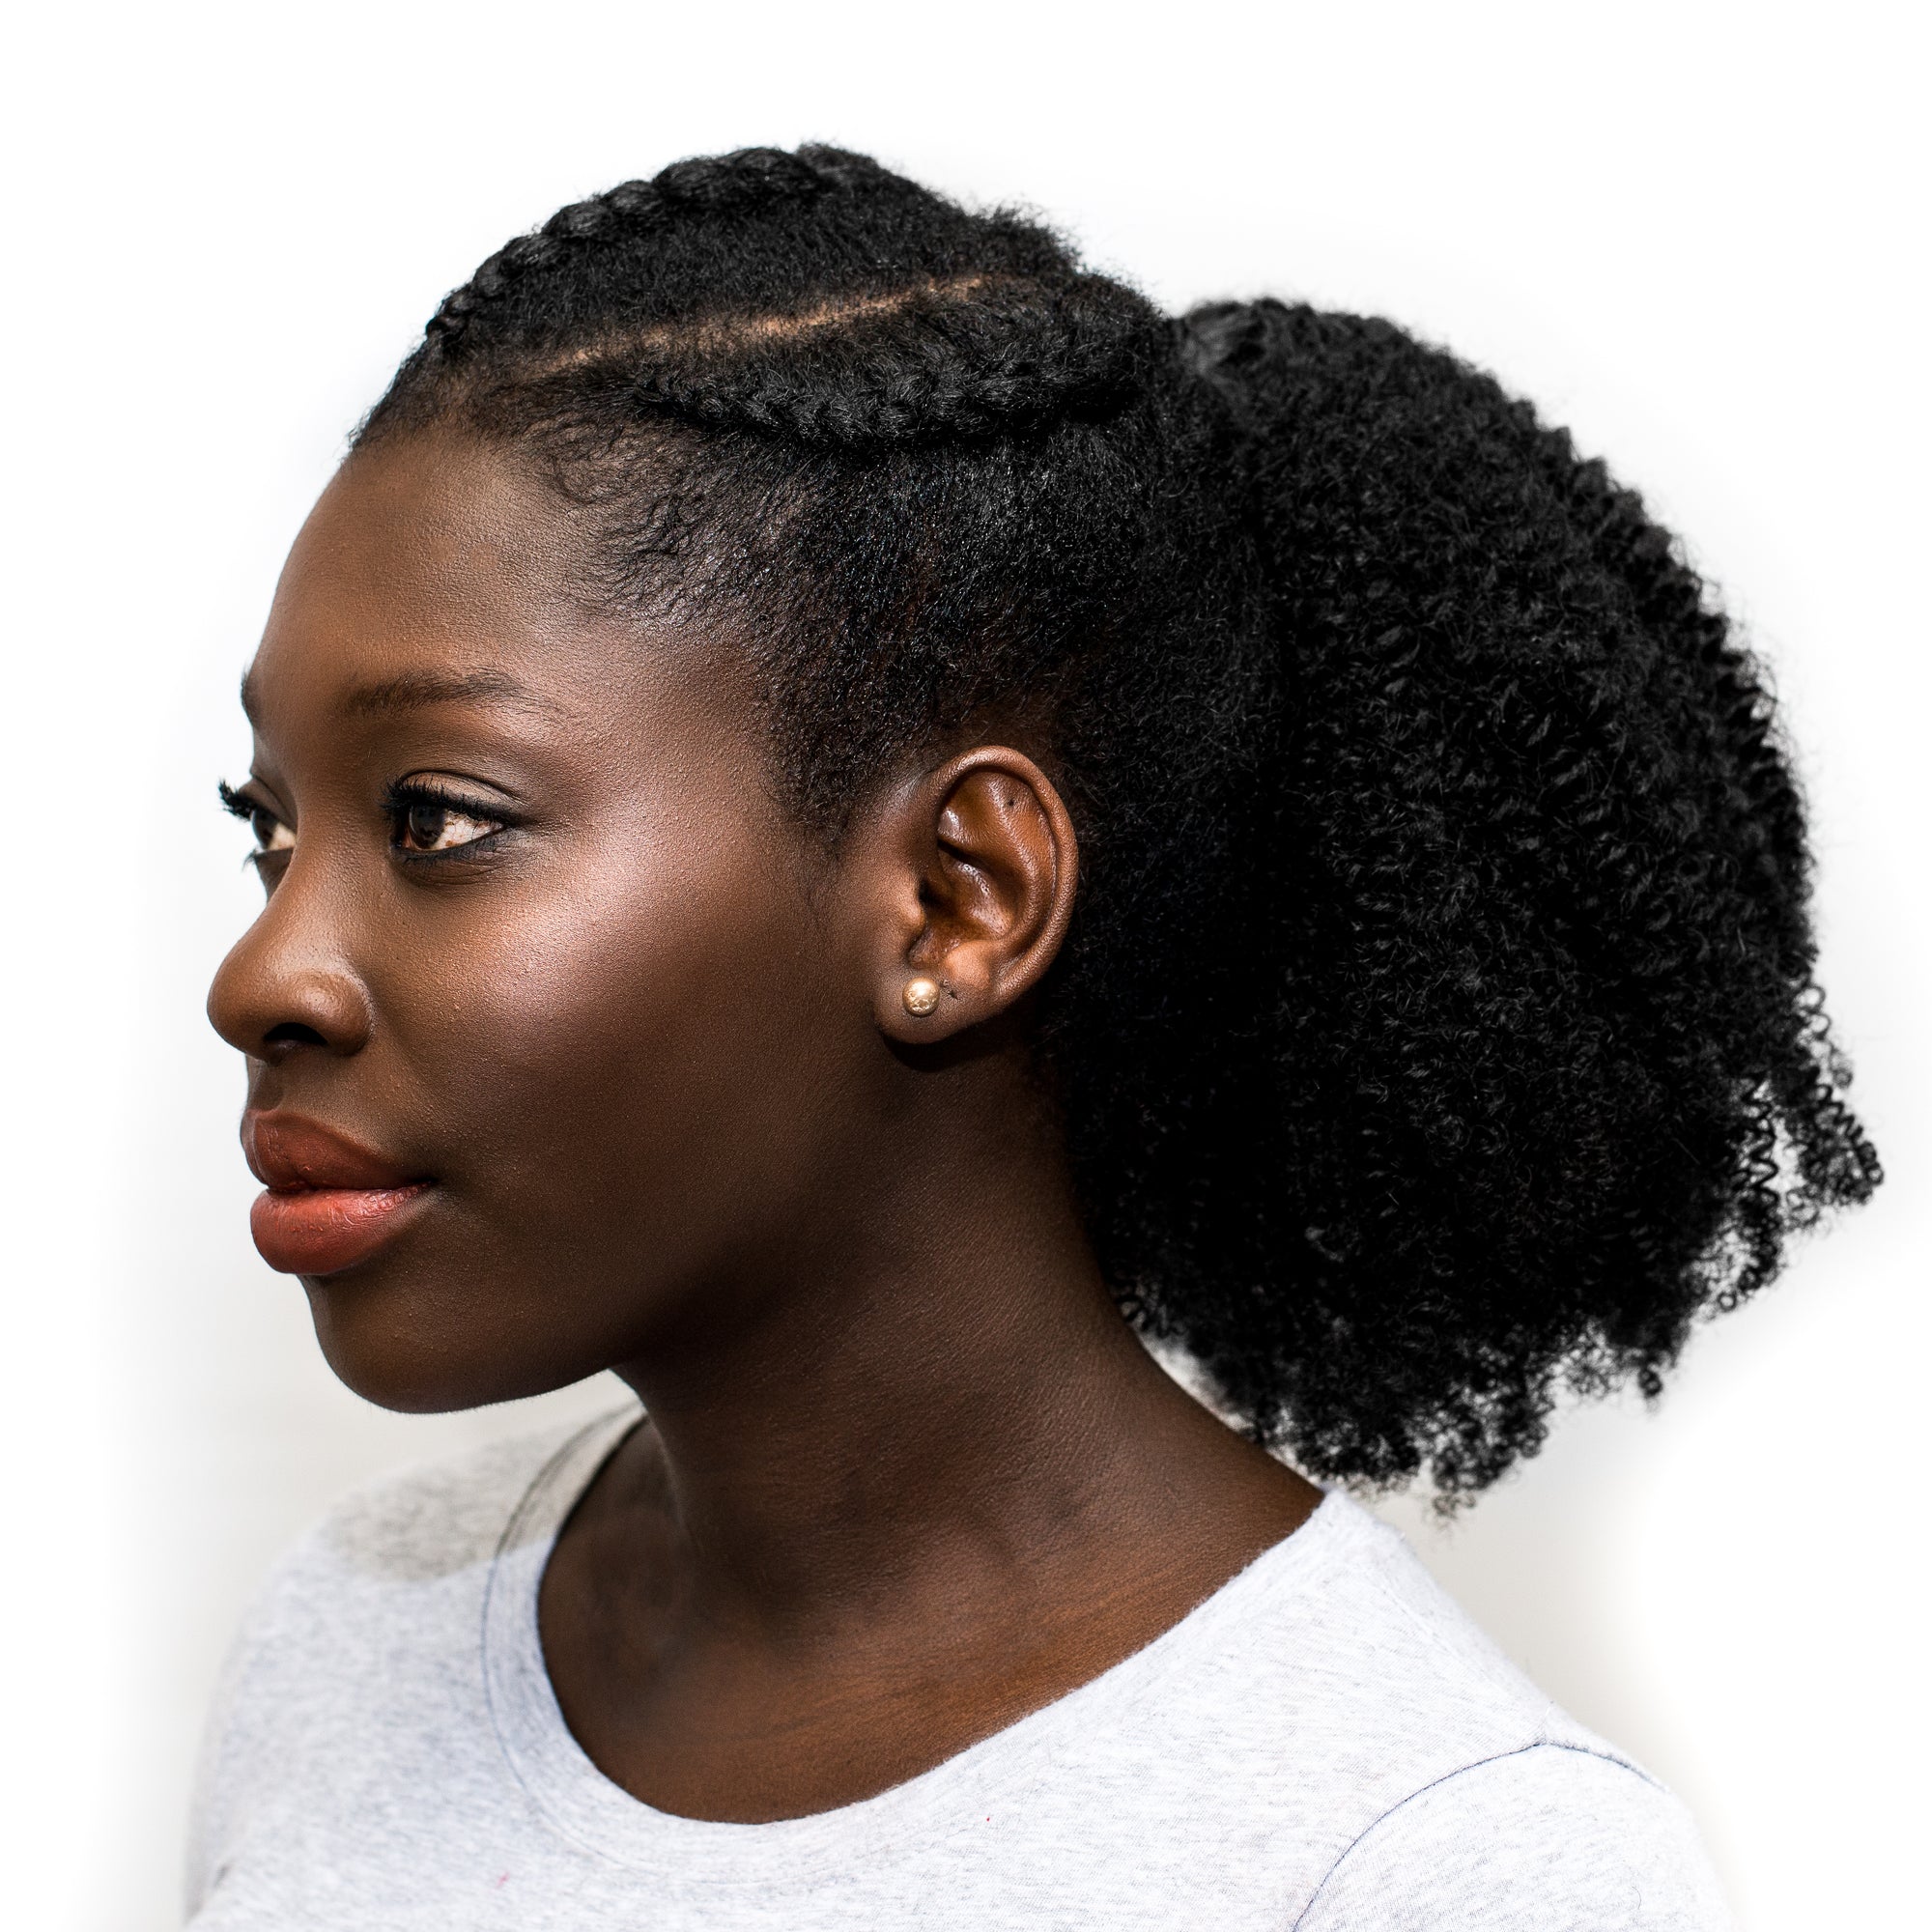 Afro Ponytails can be easily added to natural hair|  Buy afro ponytail  | High Puff Afro Ponytail | luxeriva